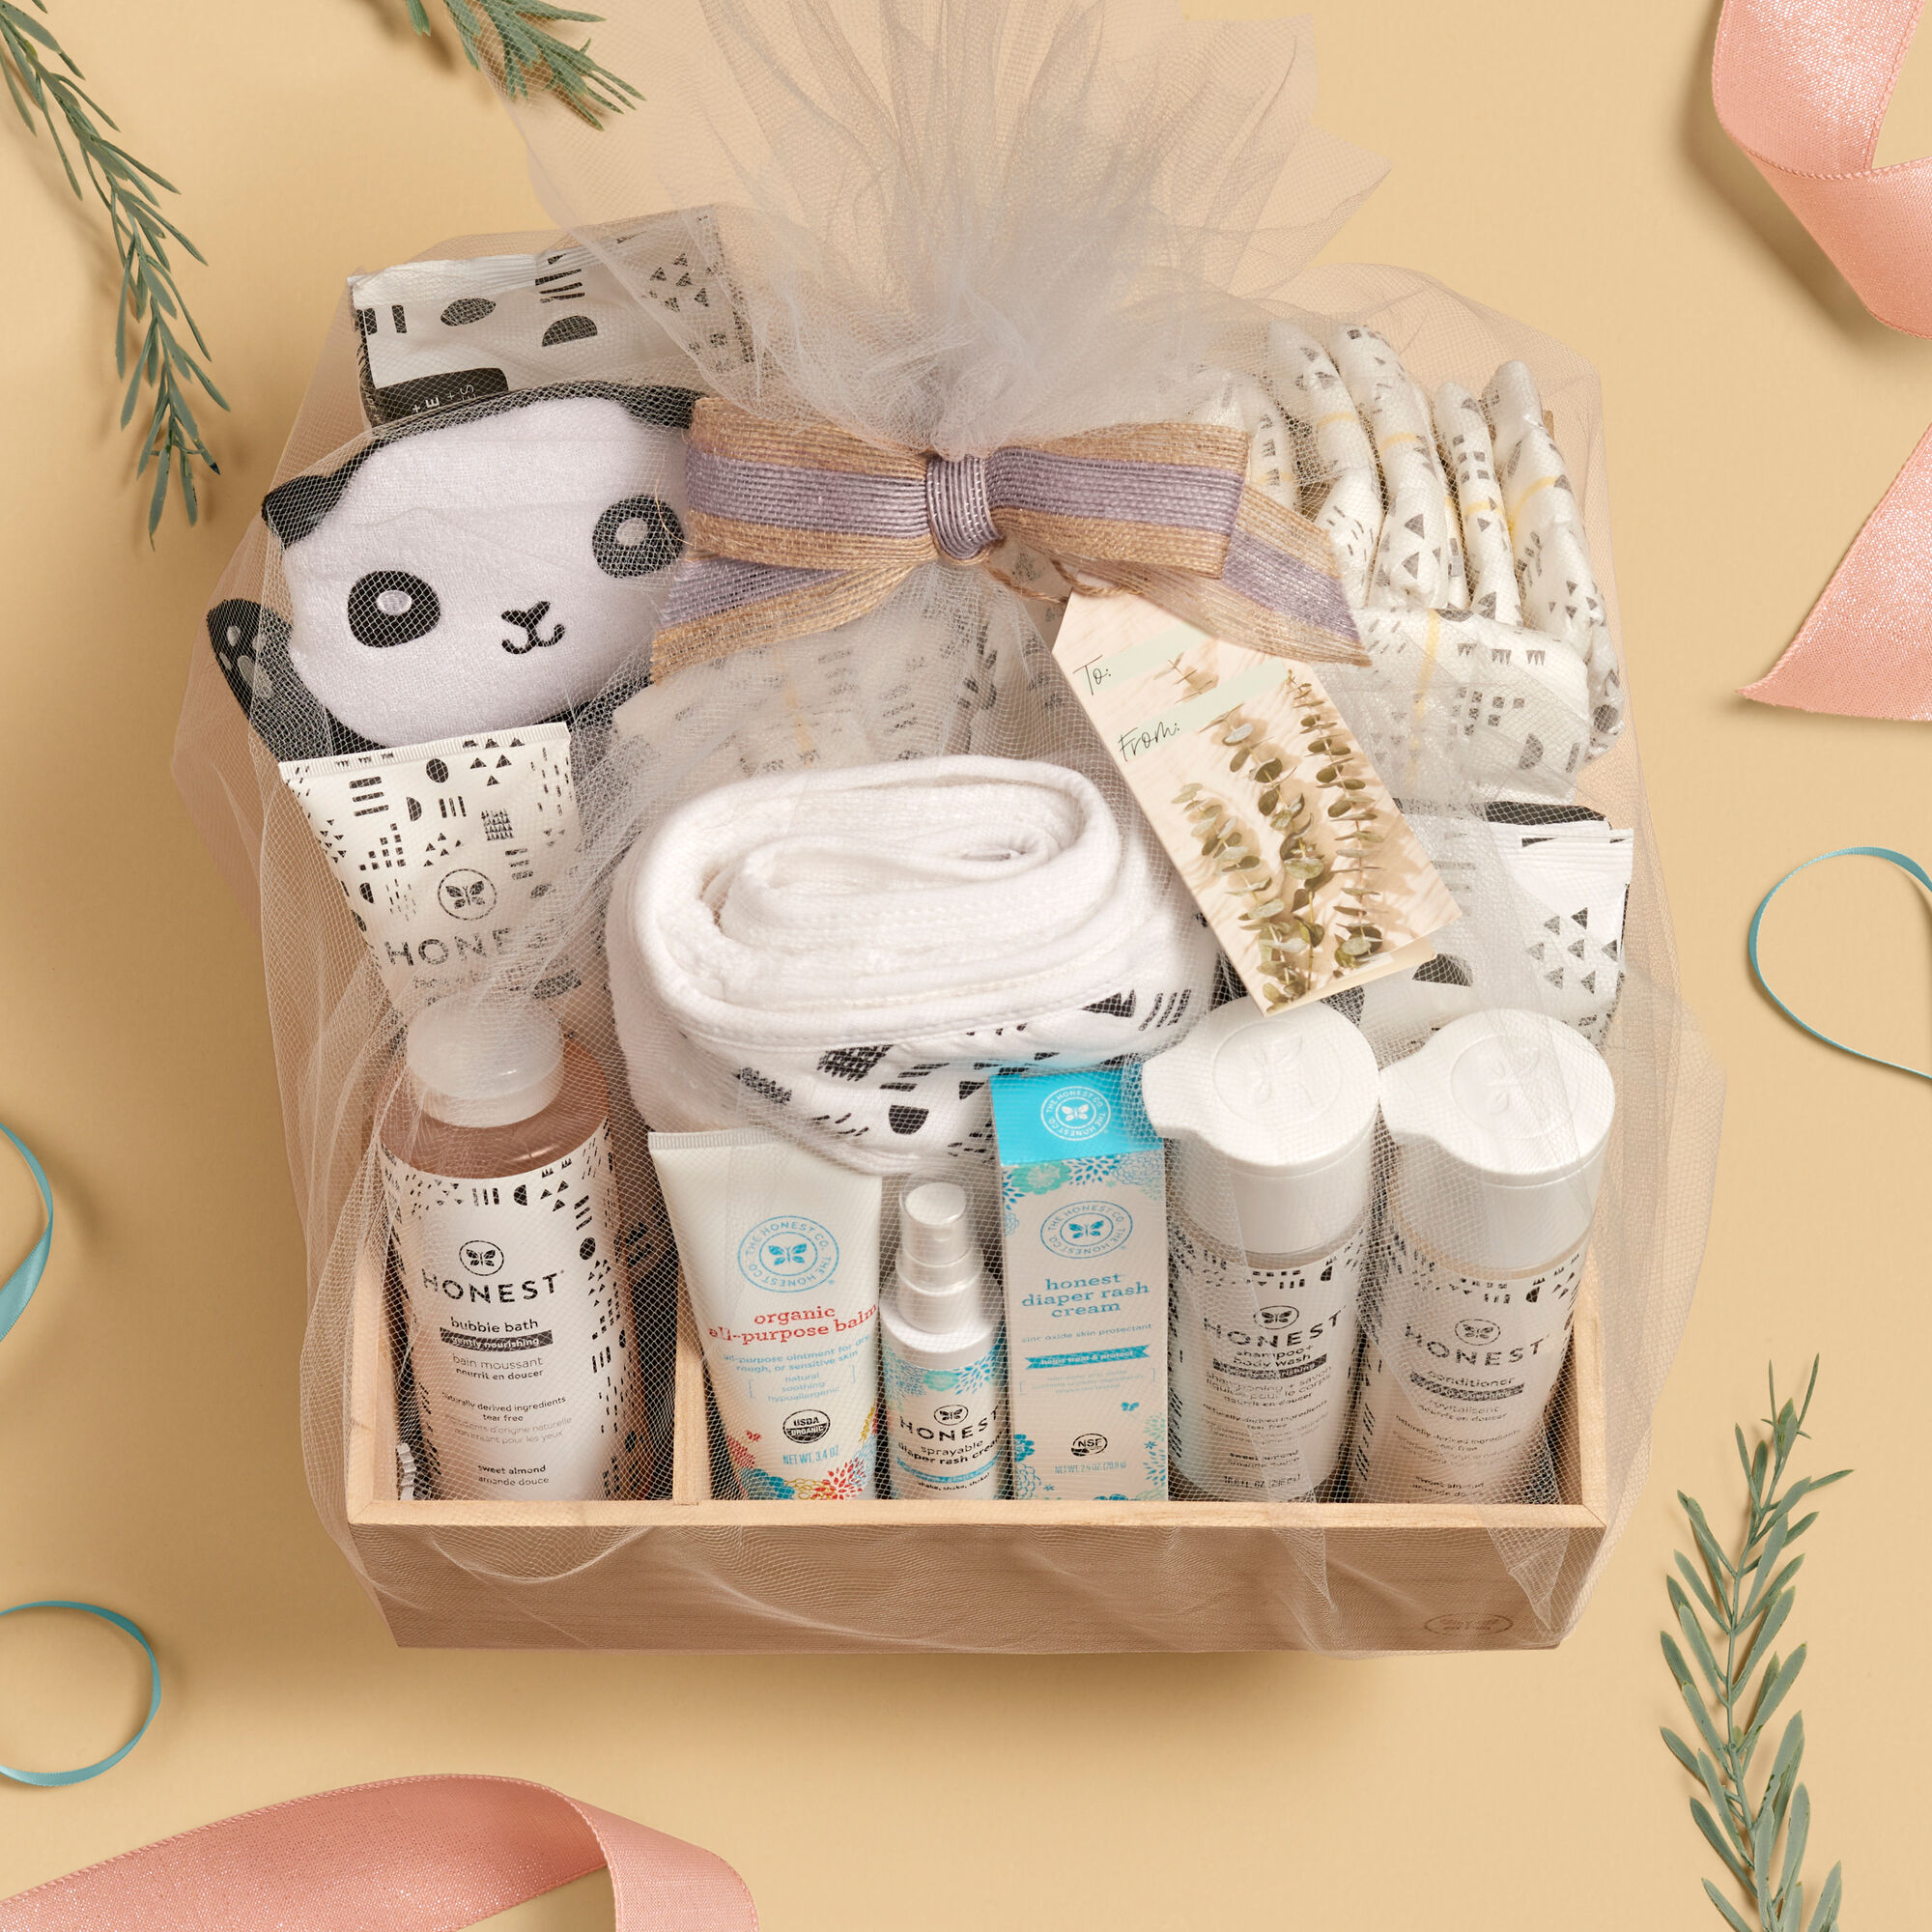 Baby’s Panda Paw-ty Deluxe Routine Gift Set